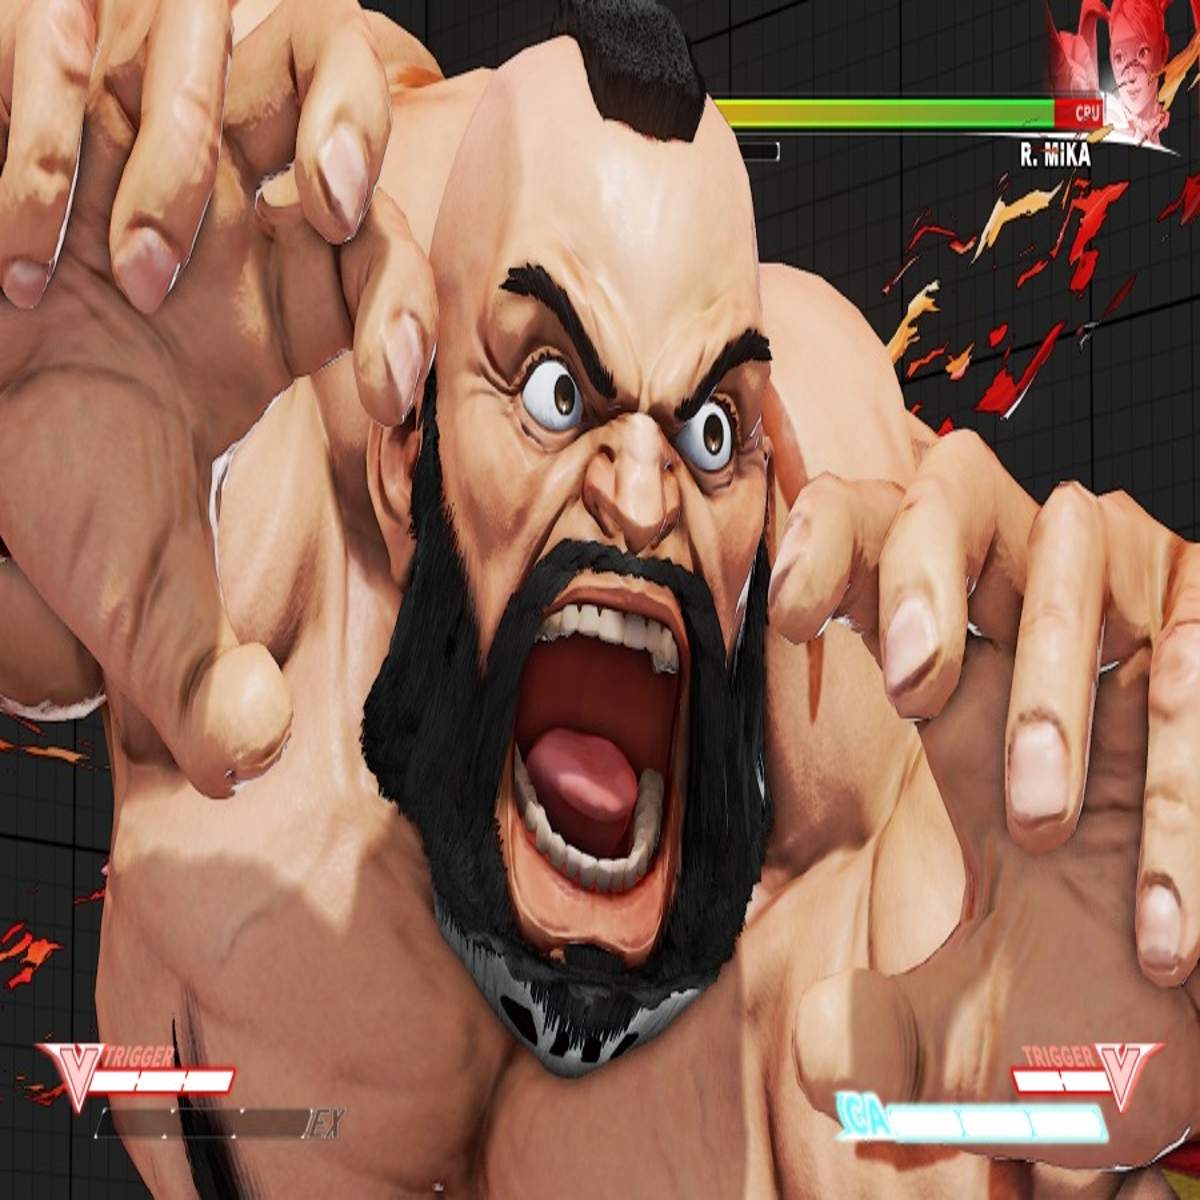 How to easily counter Zangief in Street Fighter 6